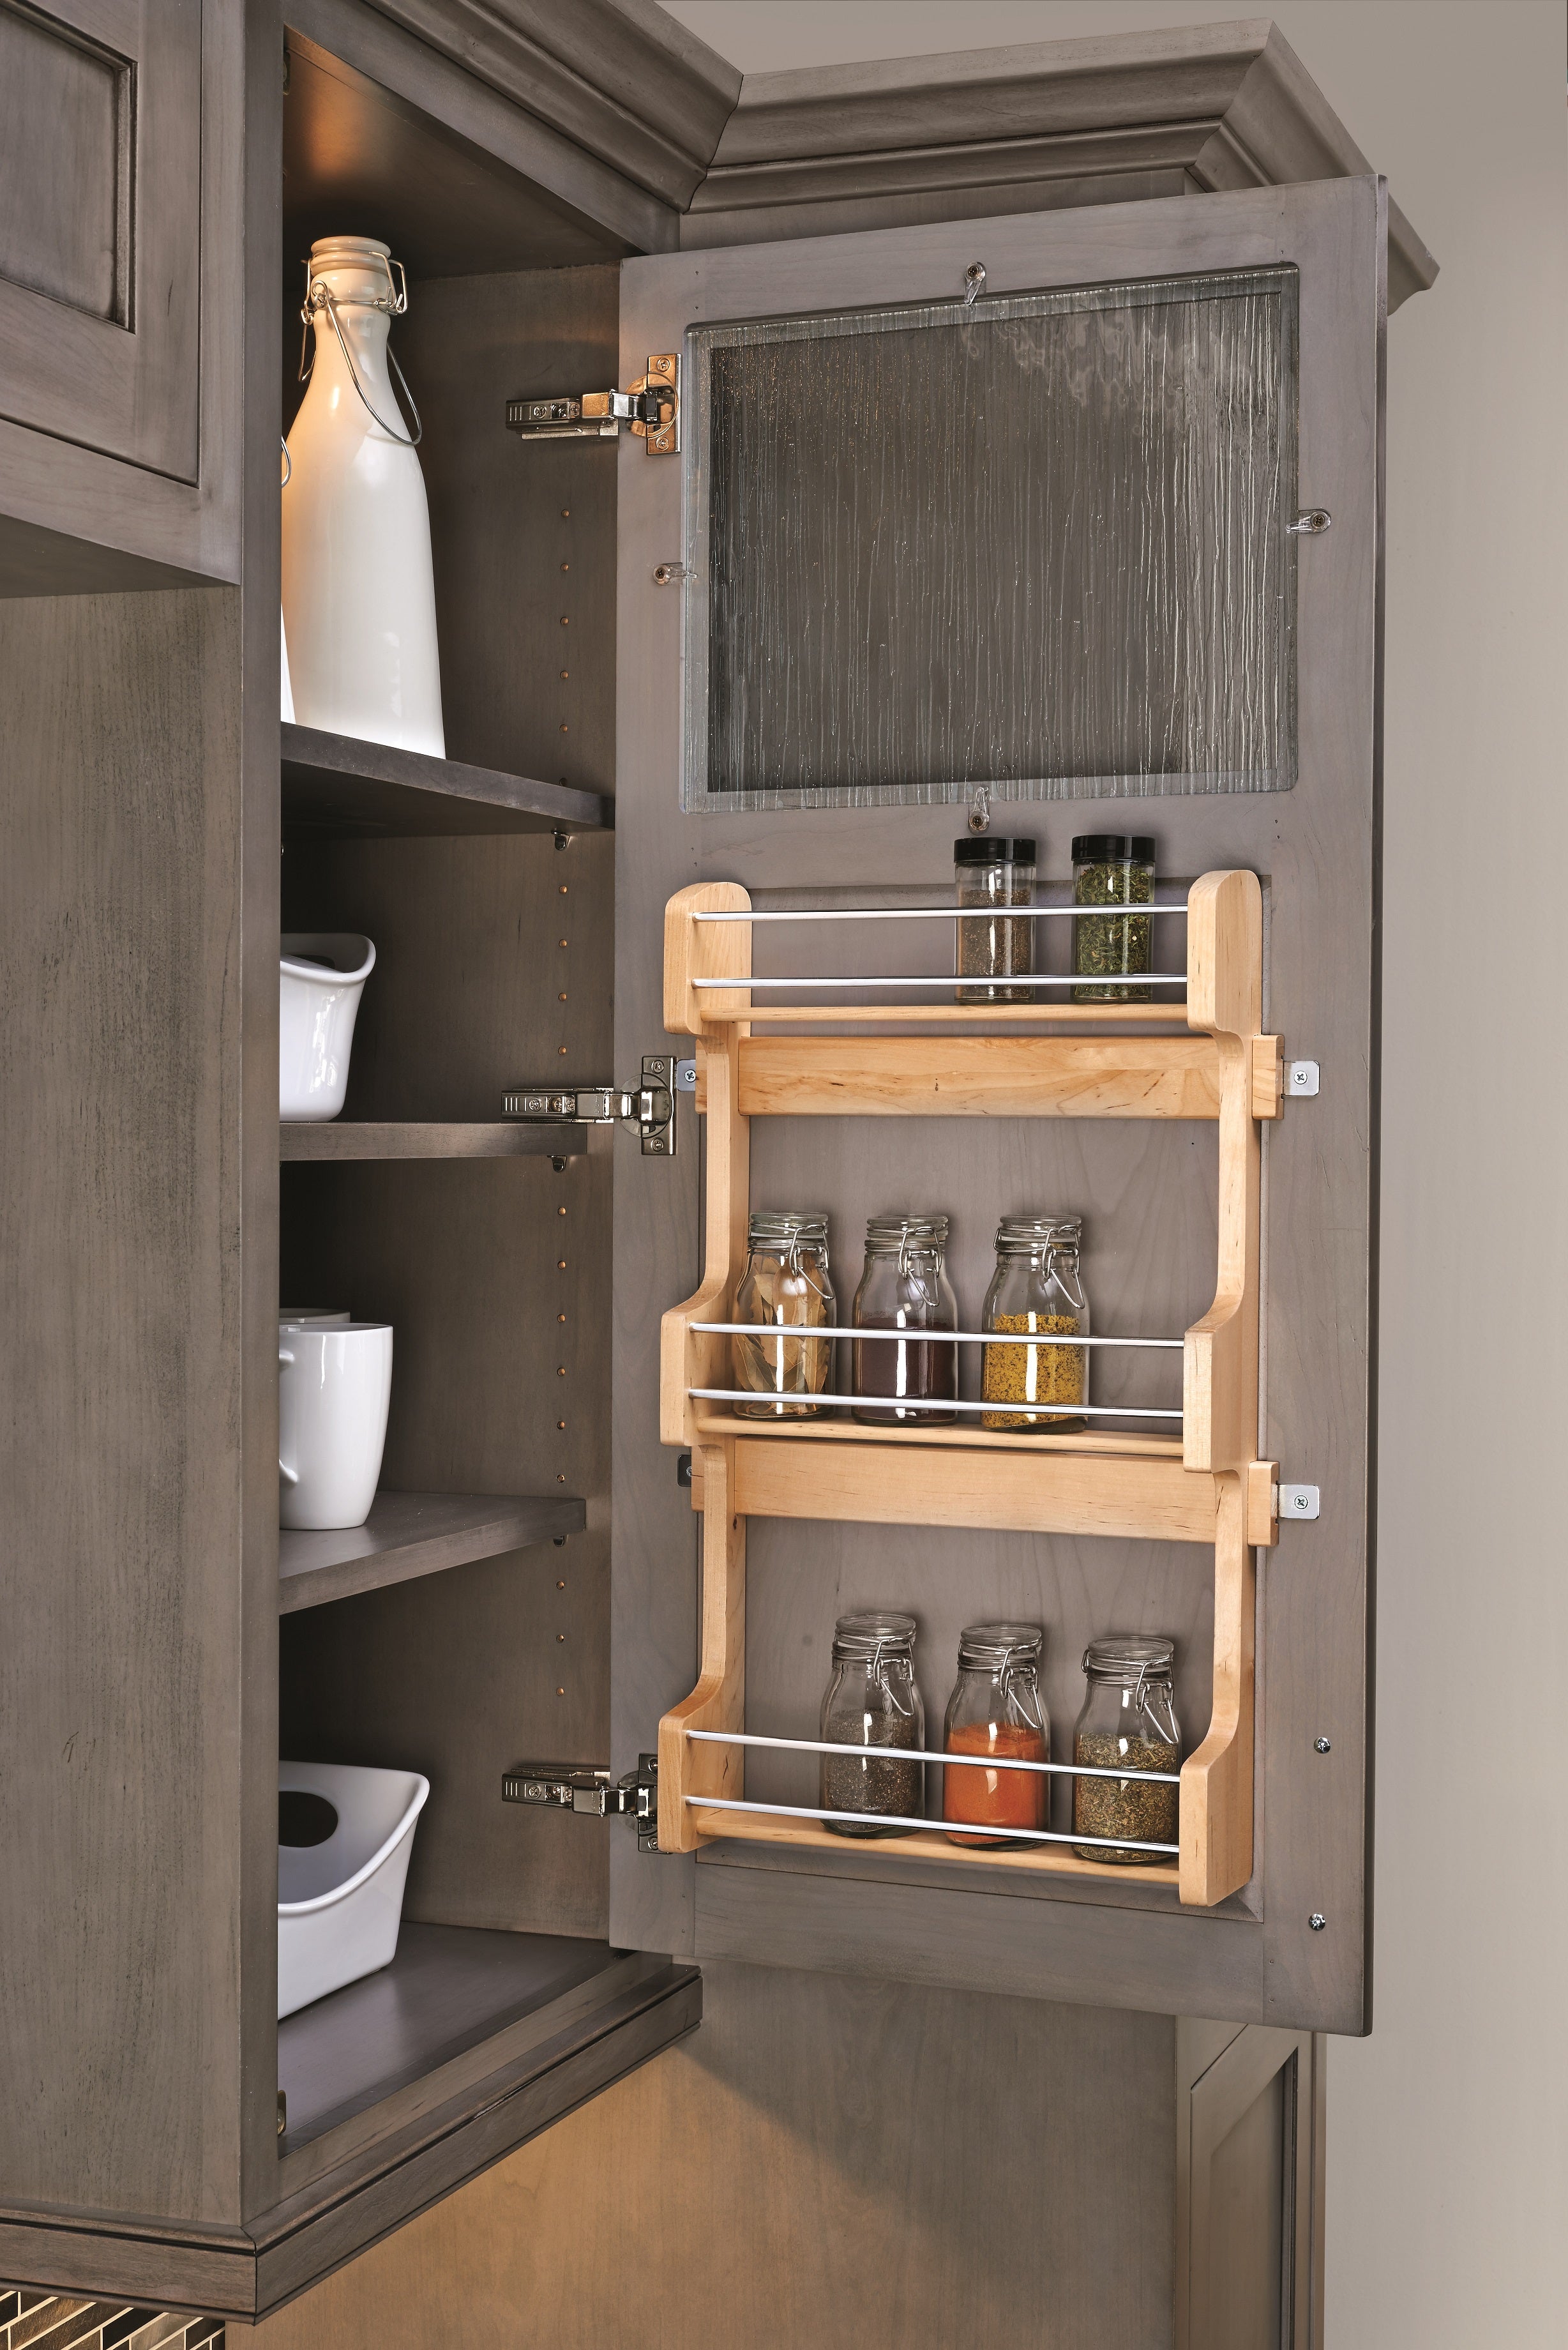 Spice Storage, Spice Rack, Wooden Crate, Under Cabinet Spice Cabinet,  Shelving for Spices 